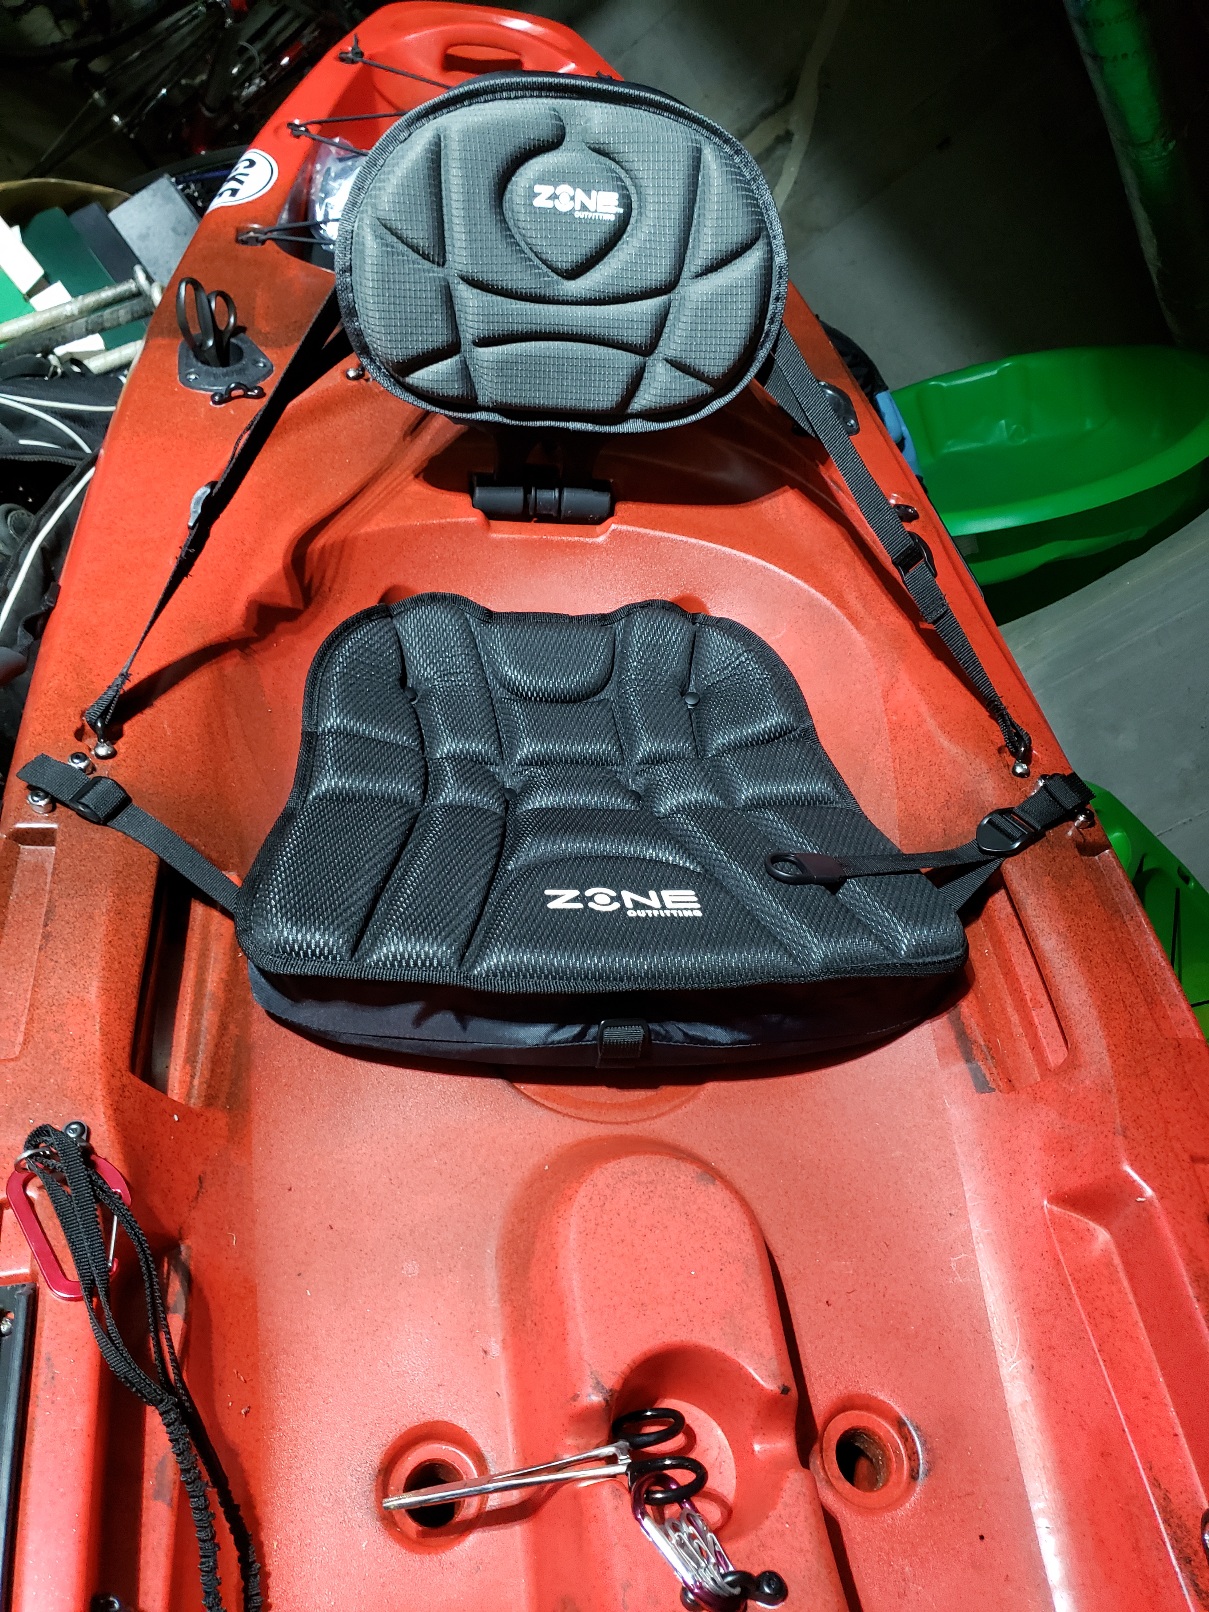 Perception Pescador (2018 non-Pro model) seat upgrade - Bass Boats, Canoes,  Kayaks and more - Bass Fishing Forums